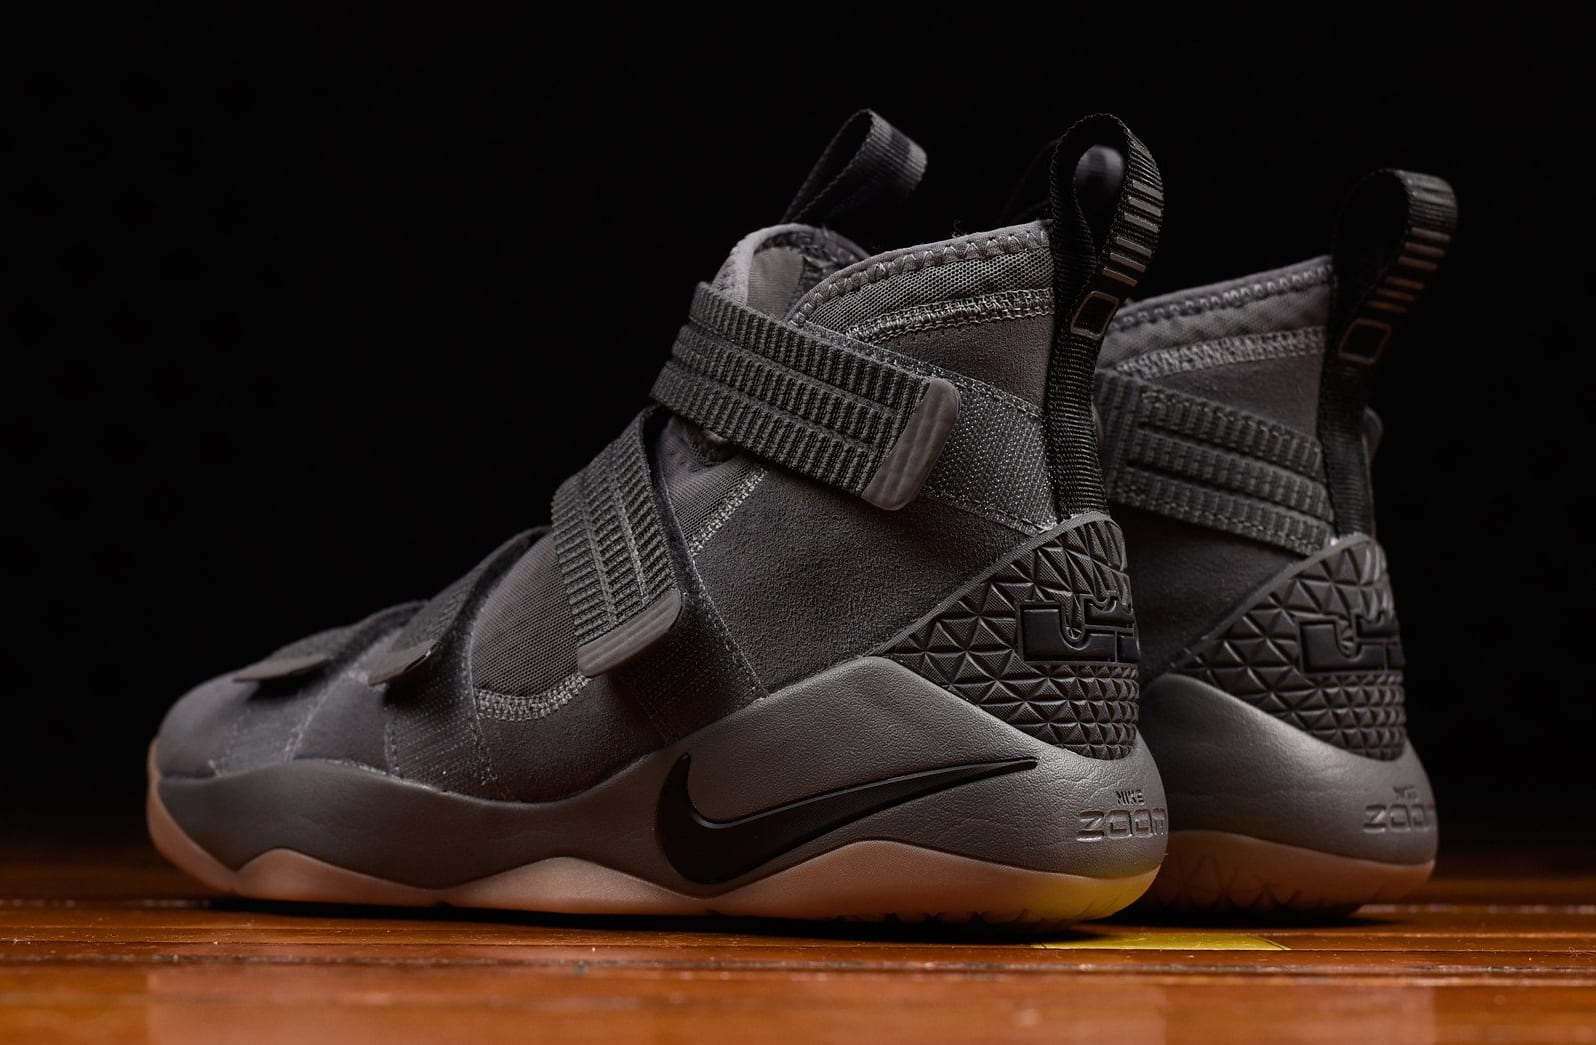 Nike LeBron Soldier 11 Grey Gum Release Date Lateral 897646-003